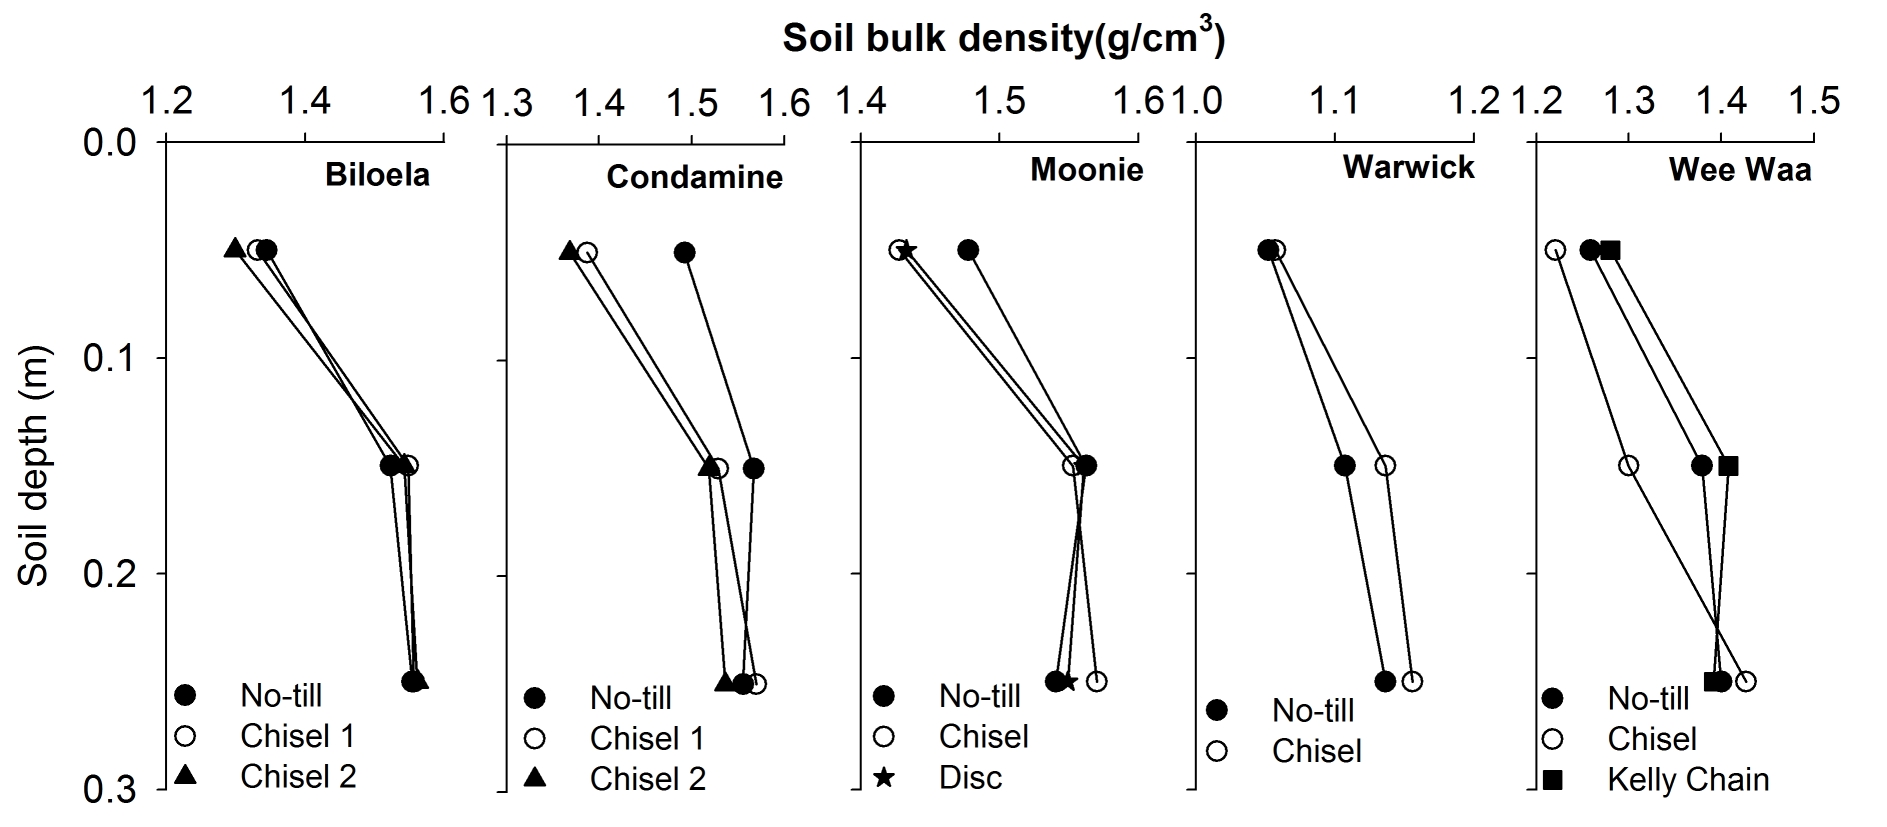 5 line graphs showing the soil bulk density of different farming systems in different locations